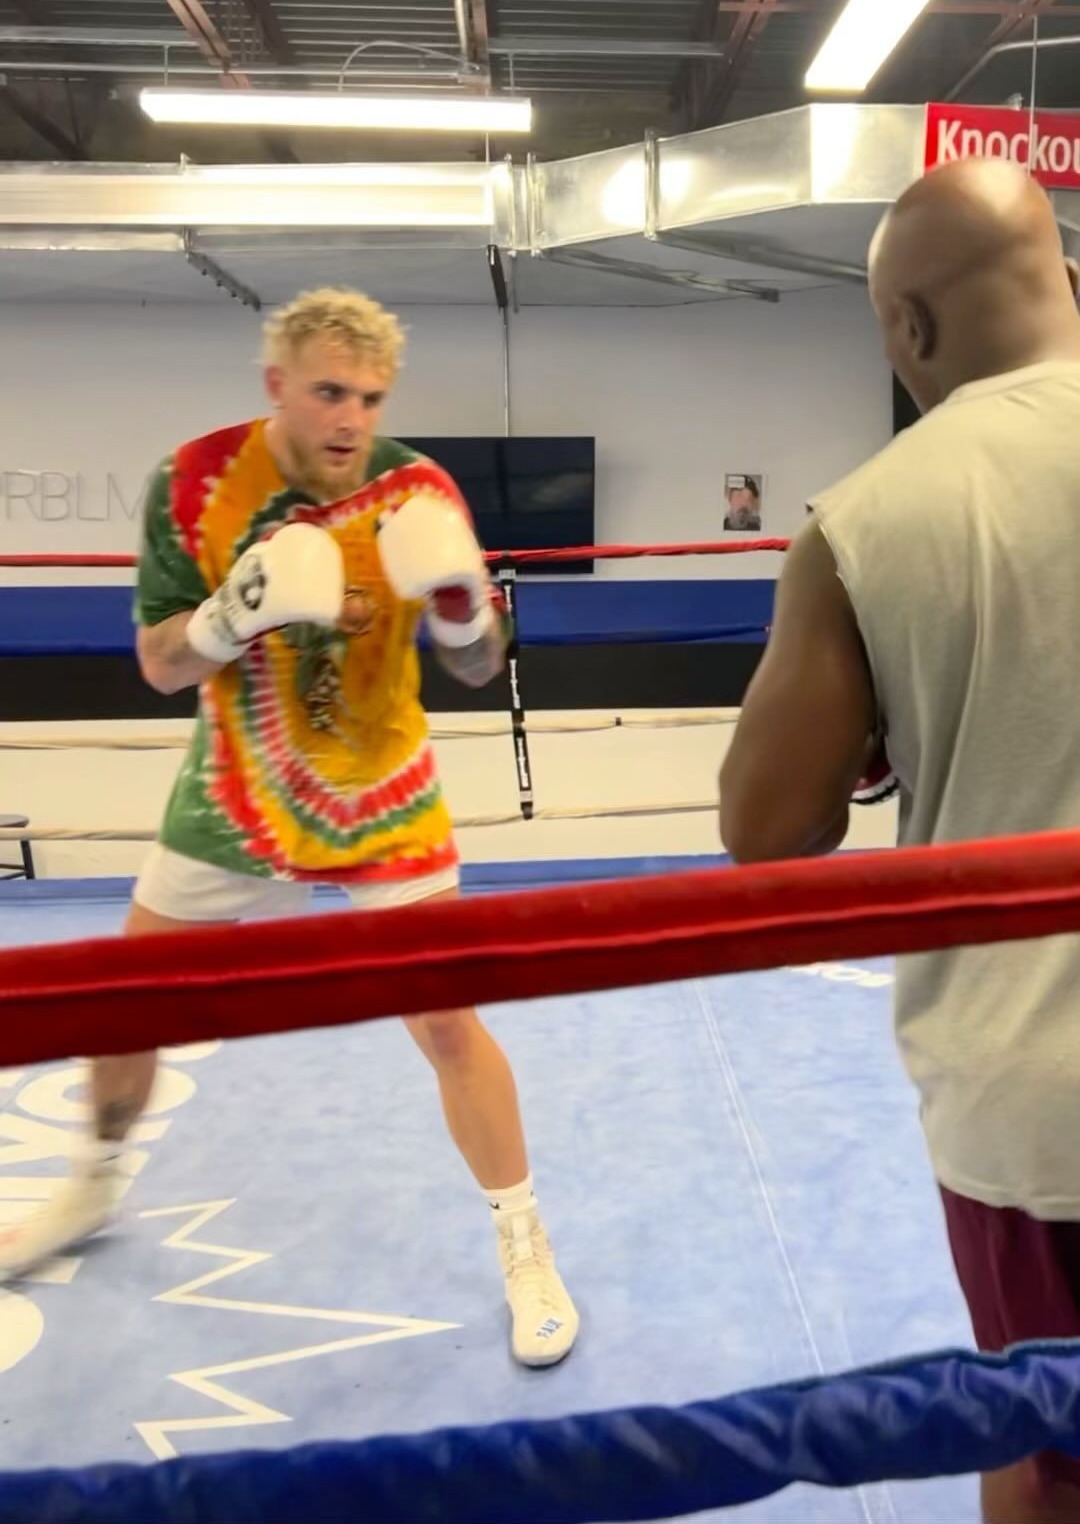 Jake Paul and Logan are back in Puerto Rico training amid rumours that summer boxing will be returning for YouTube star.